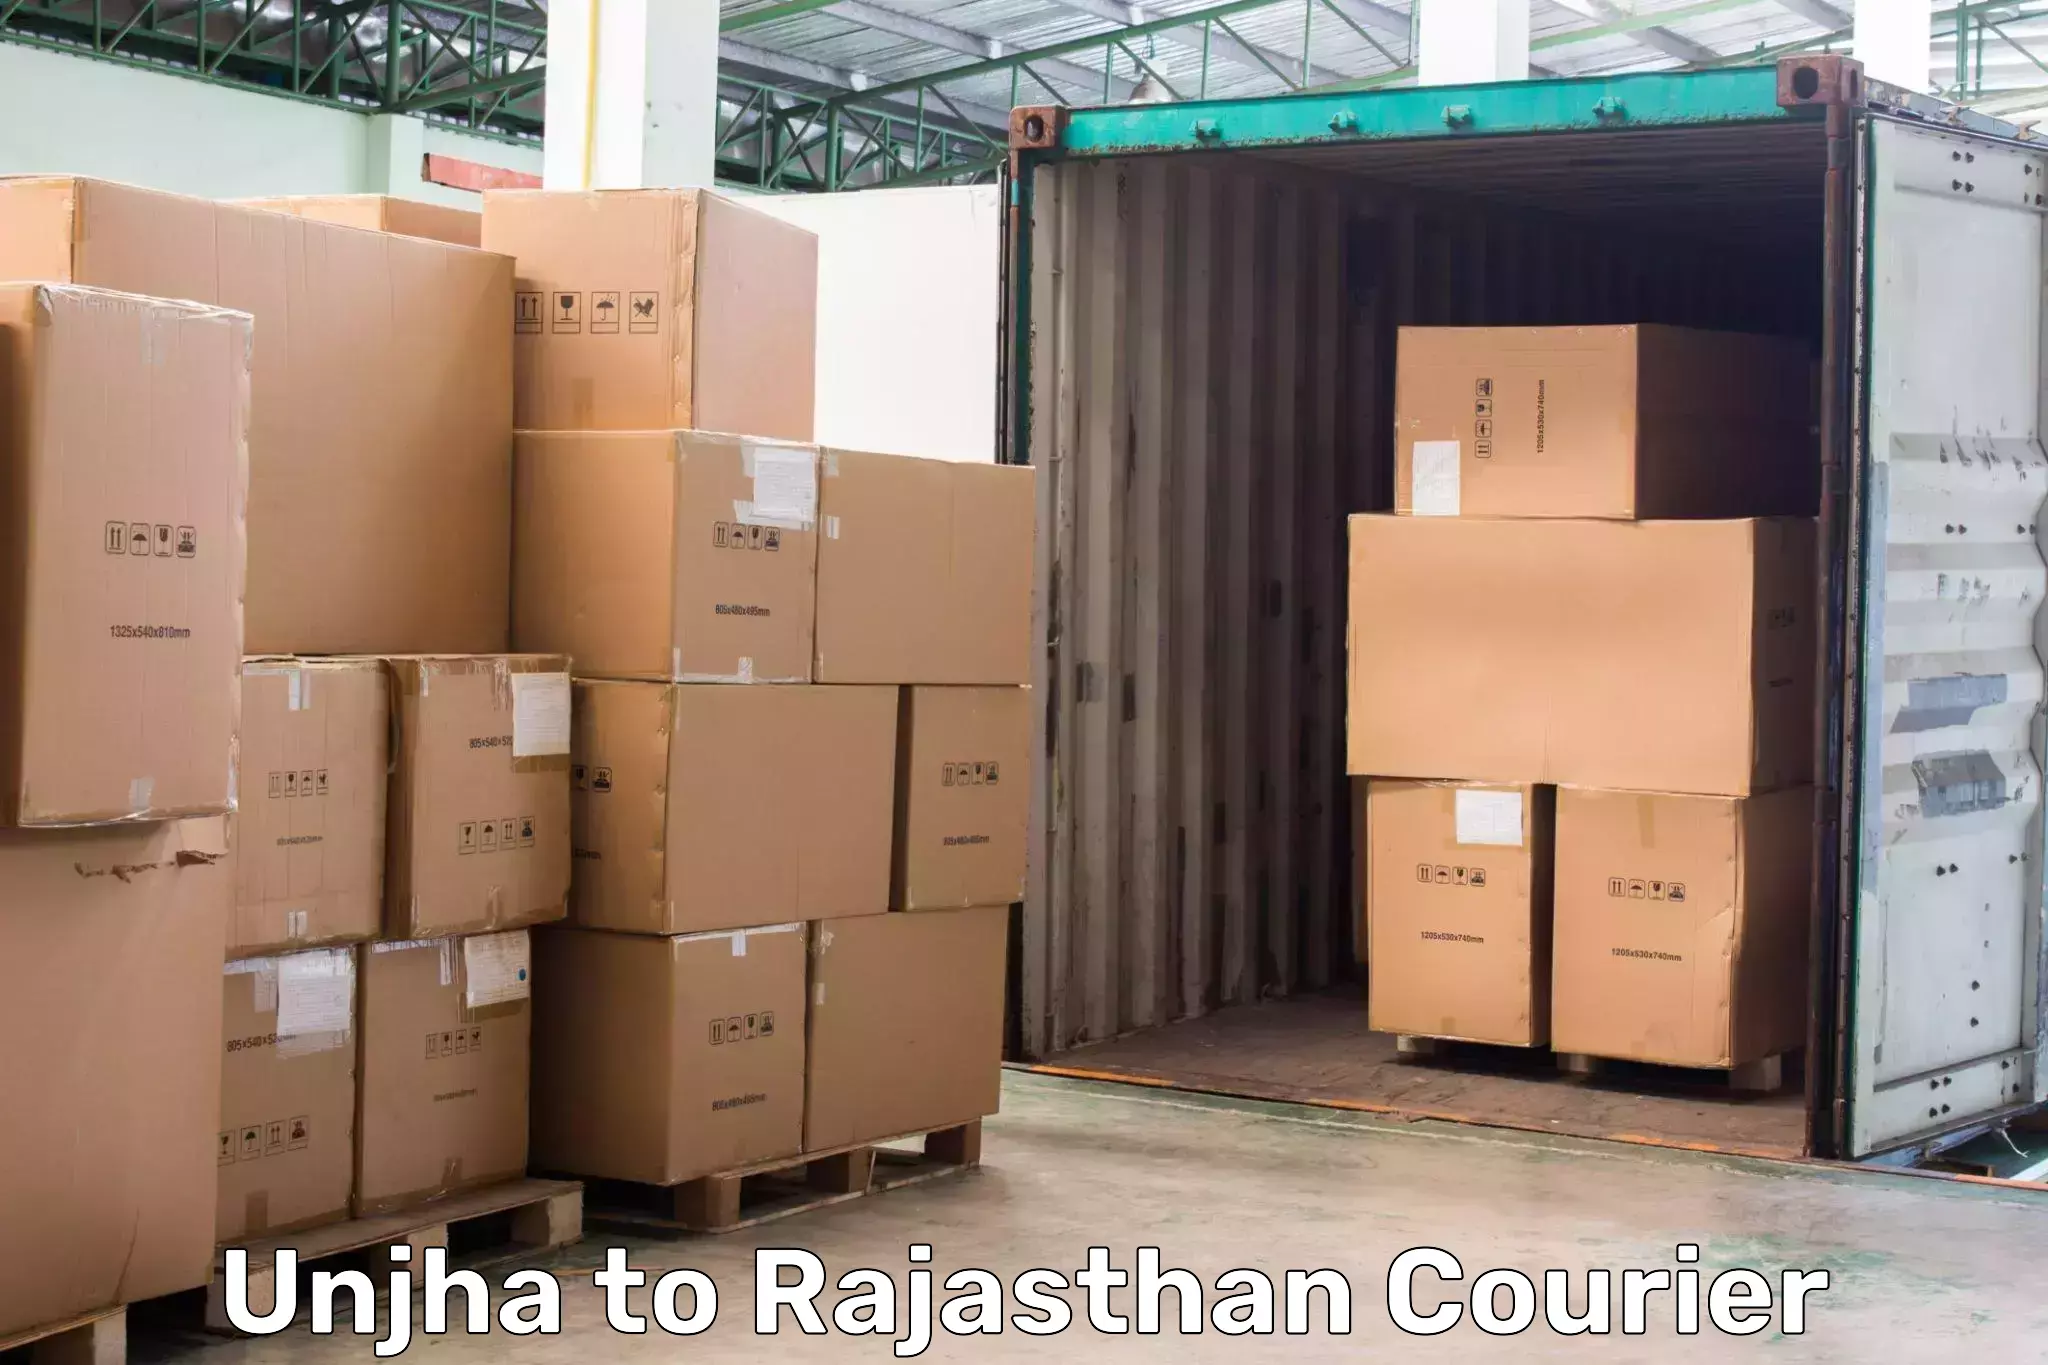 State-of-the-art courier technology Unjha to Nawalgarh